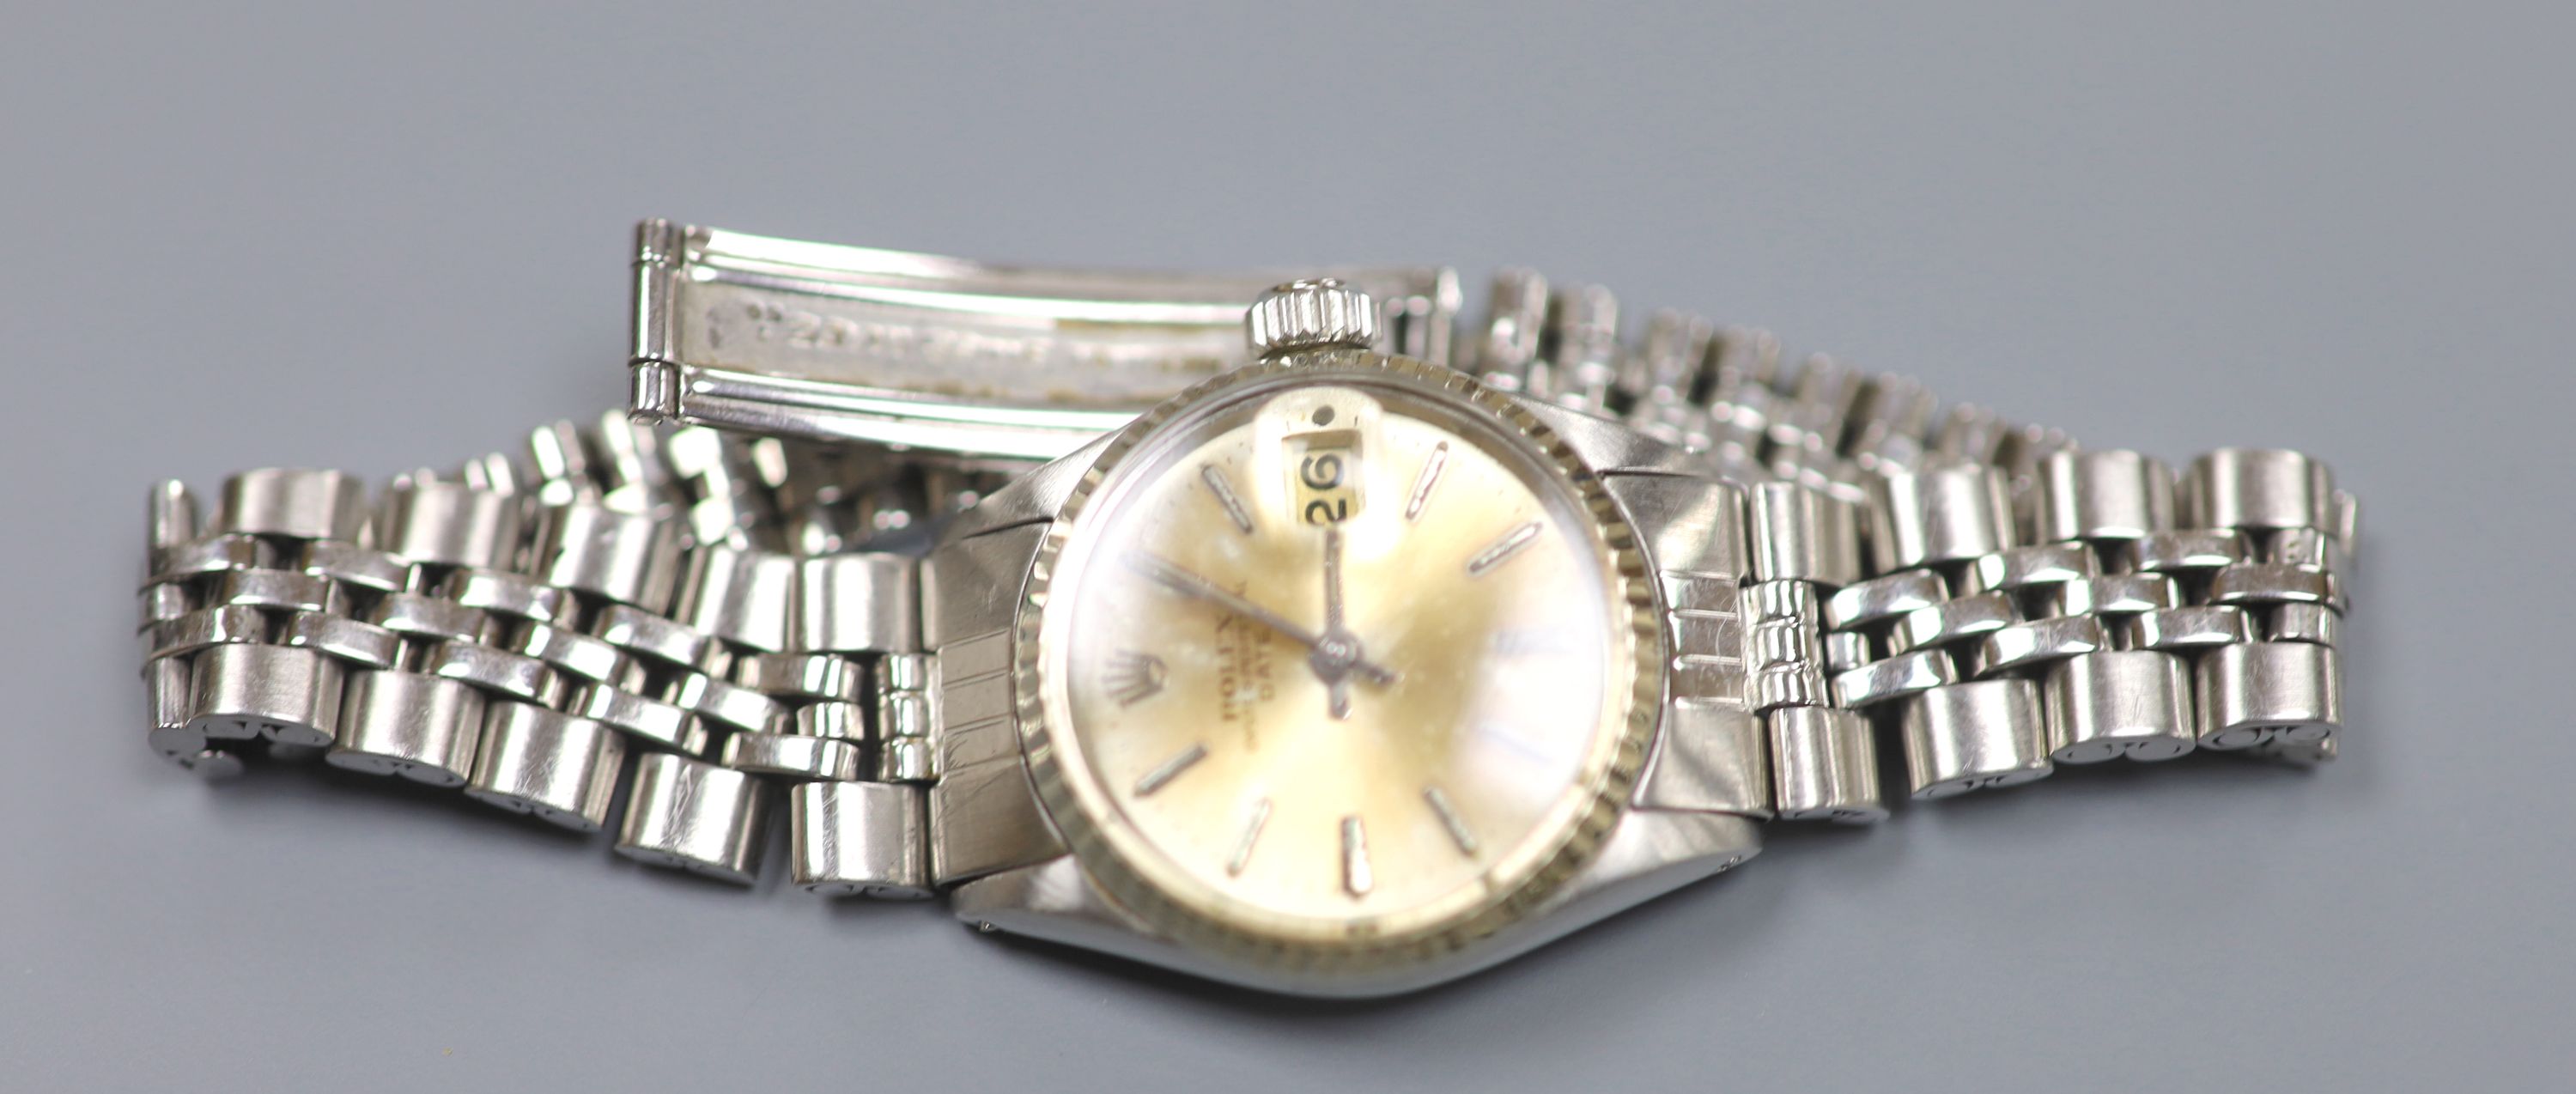 A ladys 1960s stainless steel Rolex Oyster Perpetual Date wrist watch, on Rolex bracelet, model no. 6517, serial no.1529297,